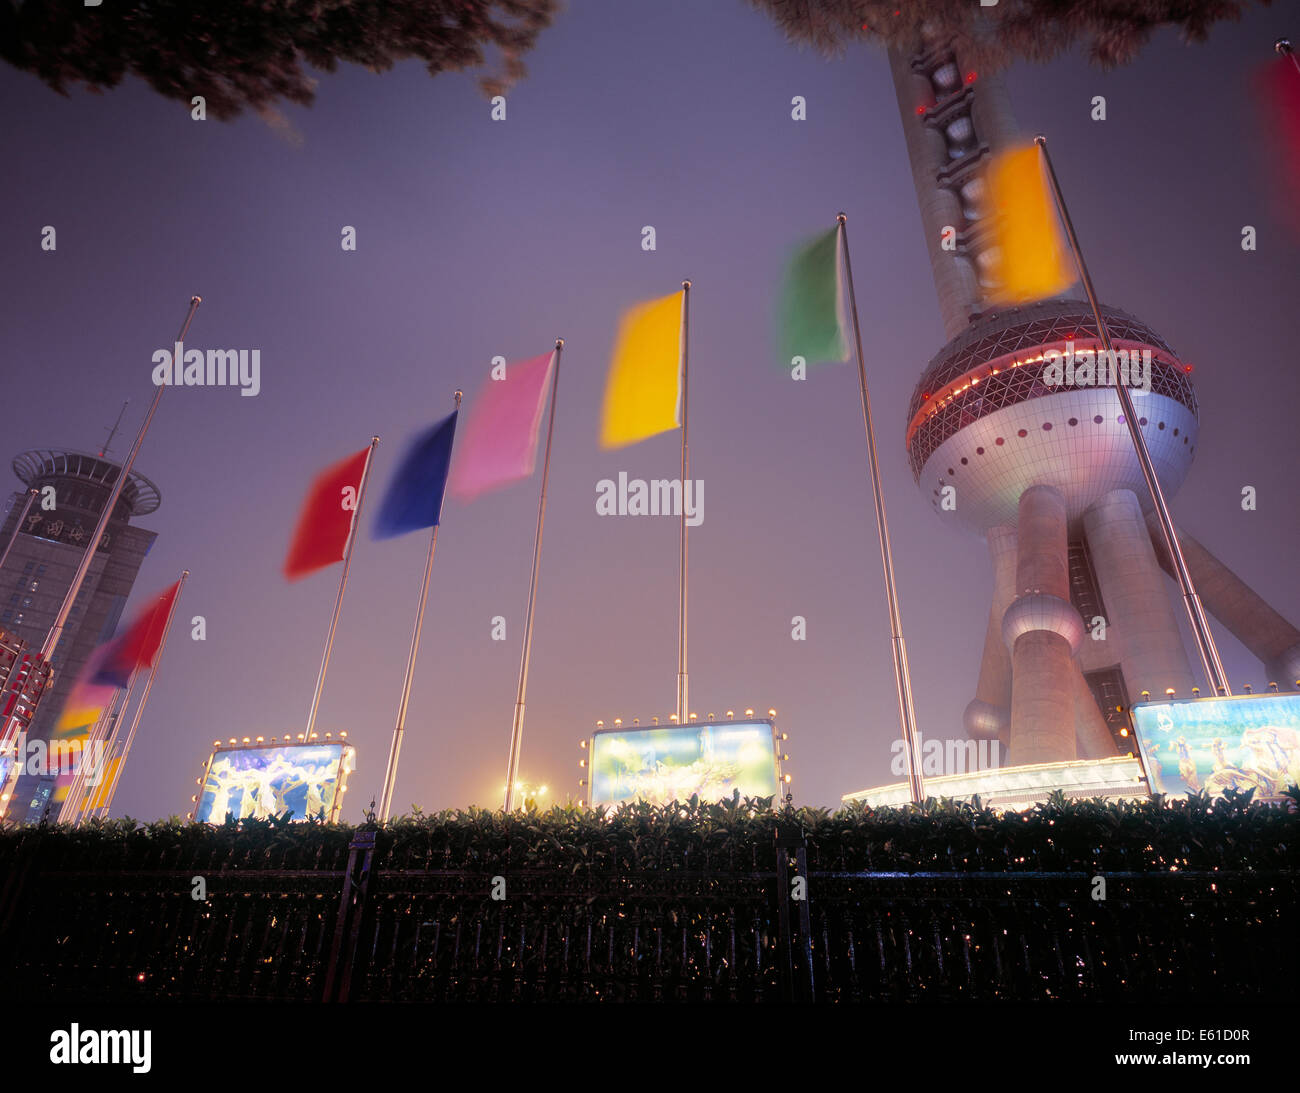 Illuminated Oriental Pearl TV Tower with colorful flags in front, Shanghai, China Stock Photo